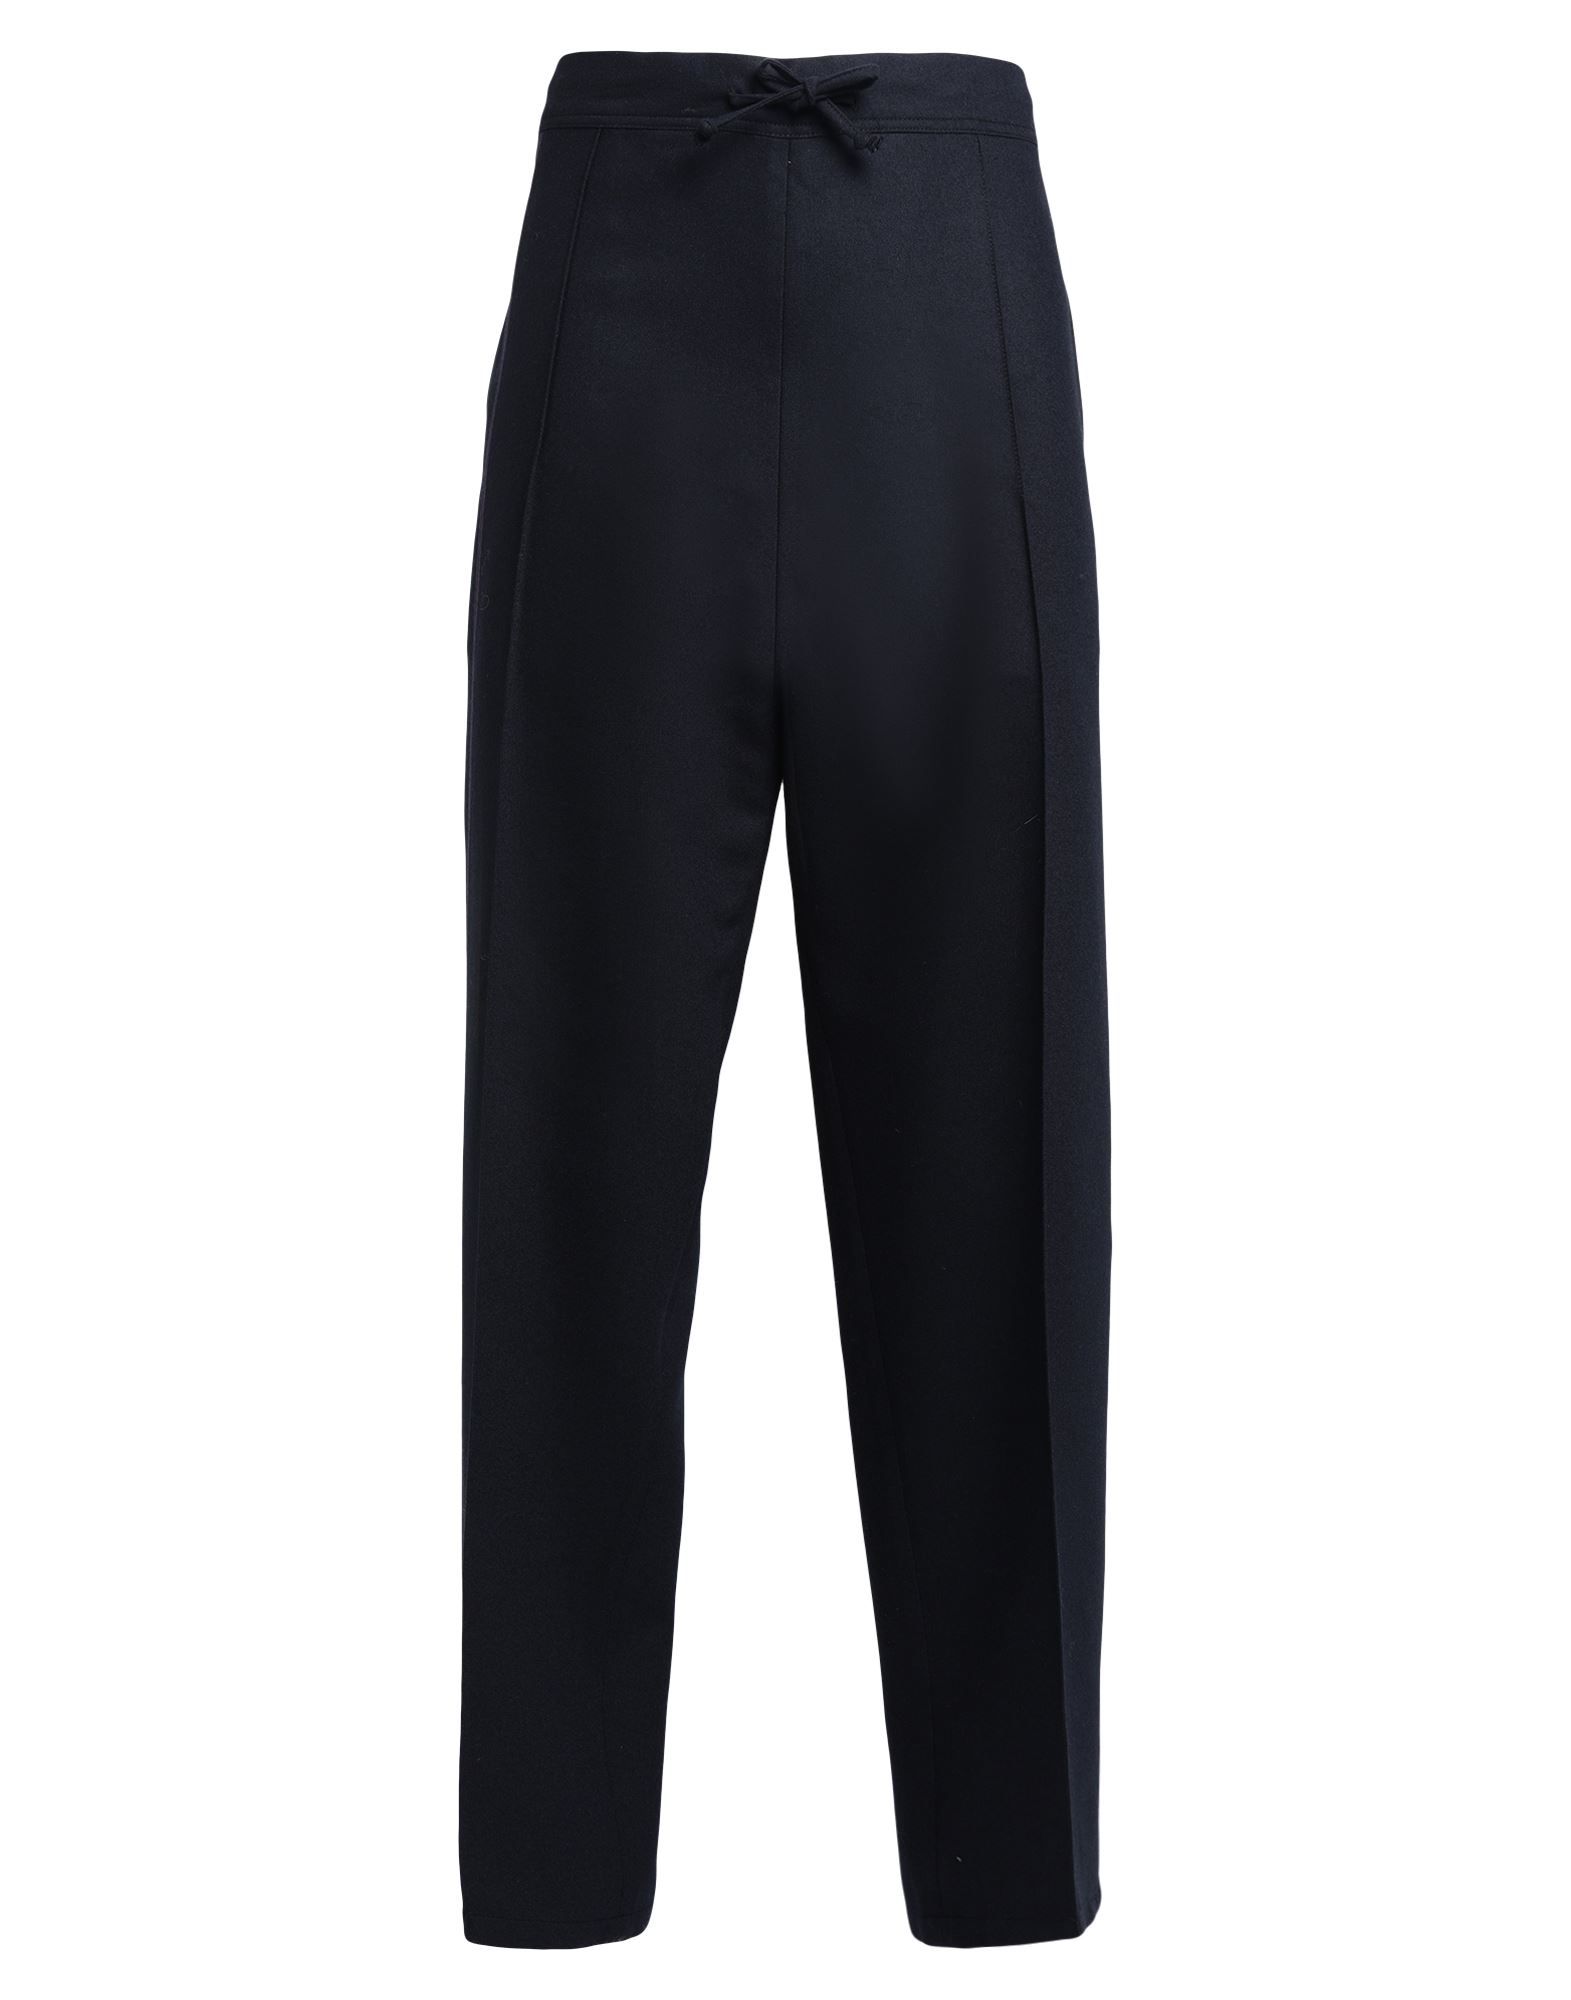 DUNHILL DUNHILL MAN PANTS MIDNIGHT BLUE SIZE 40 WOOL